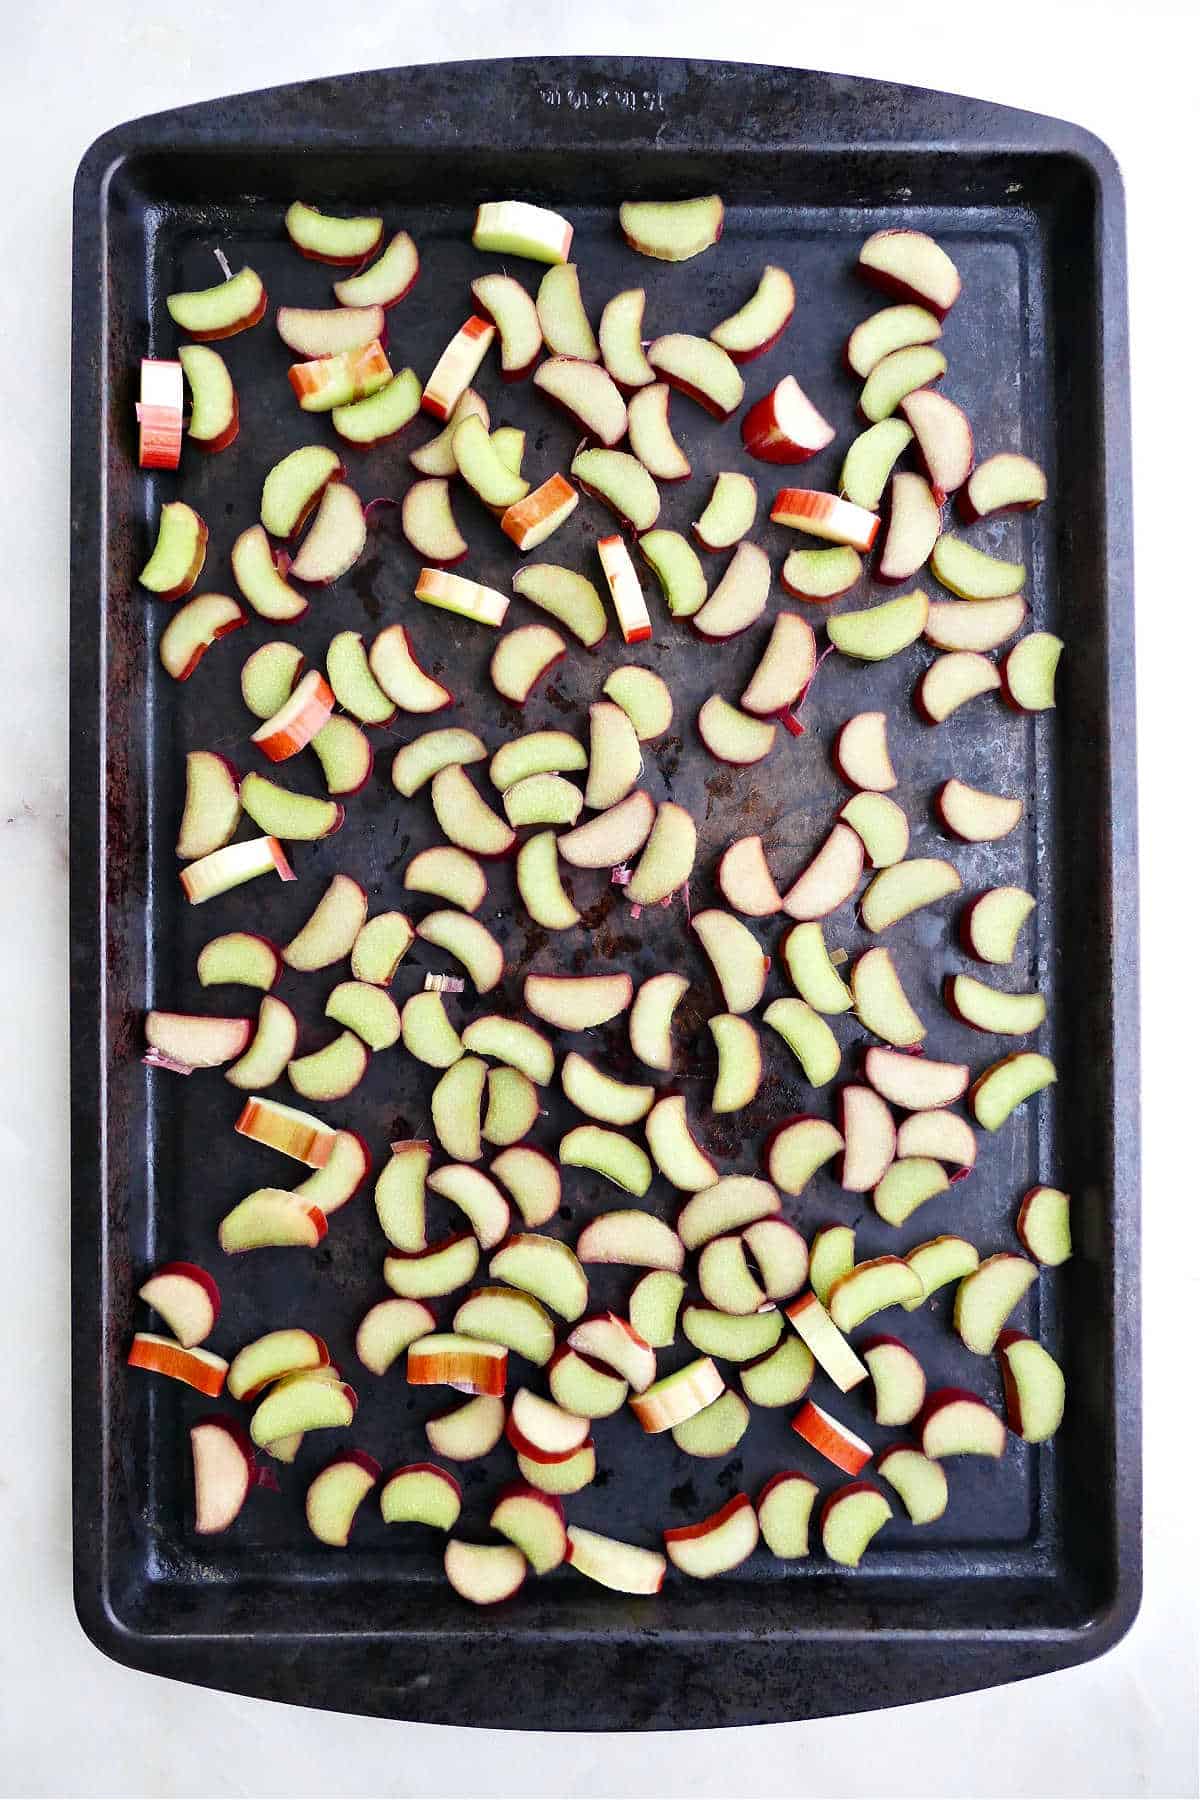 sliced rhubarb spread out in a single layer on a baking sheet for freezing